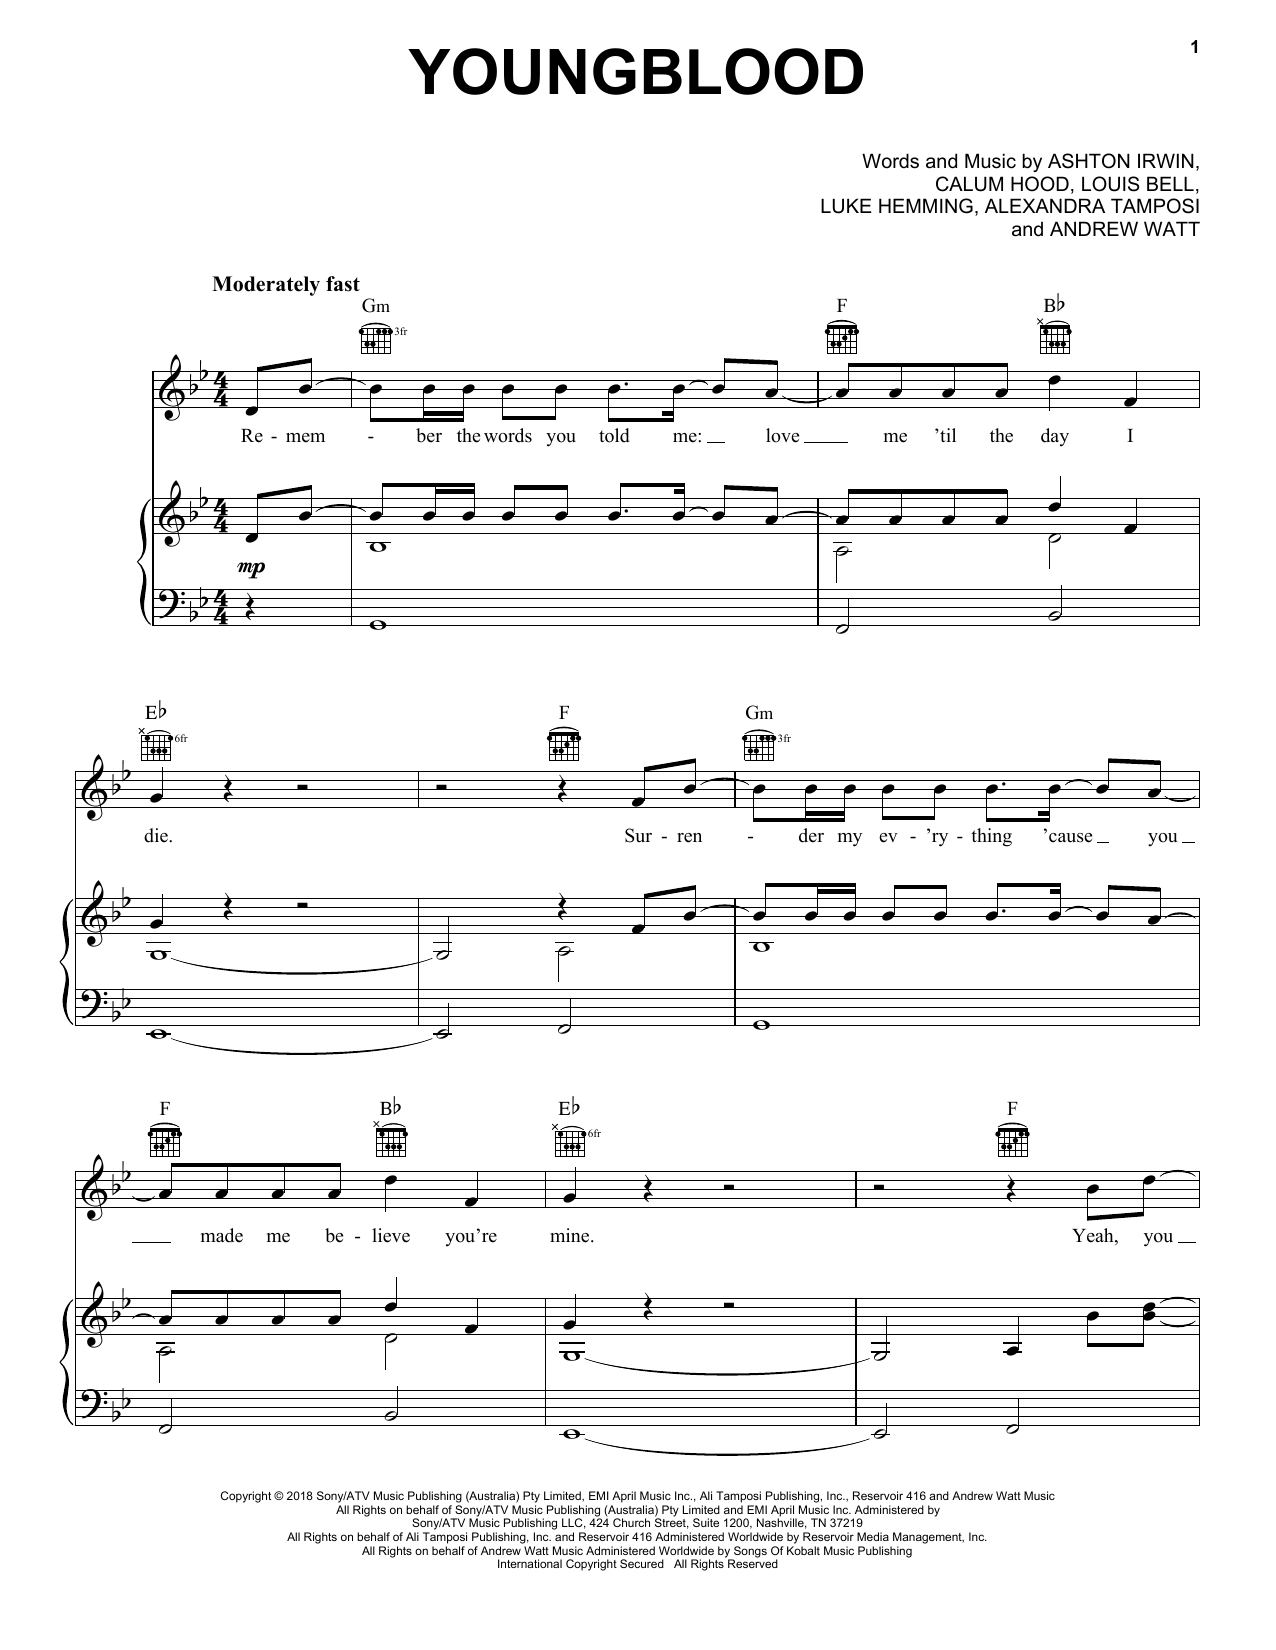 Download 5 Seconds of Summer Youngblood Sheet Music